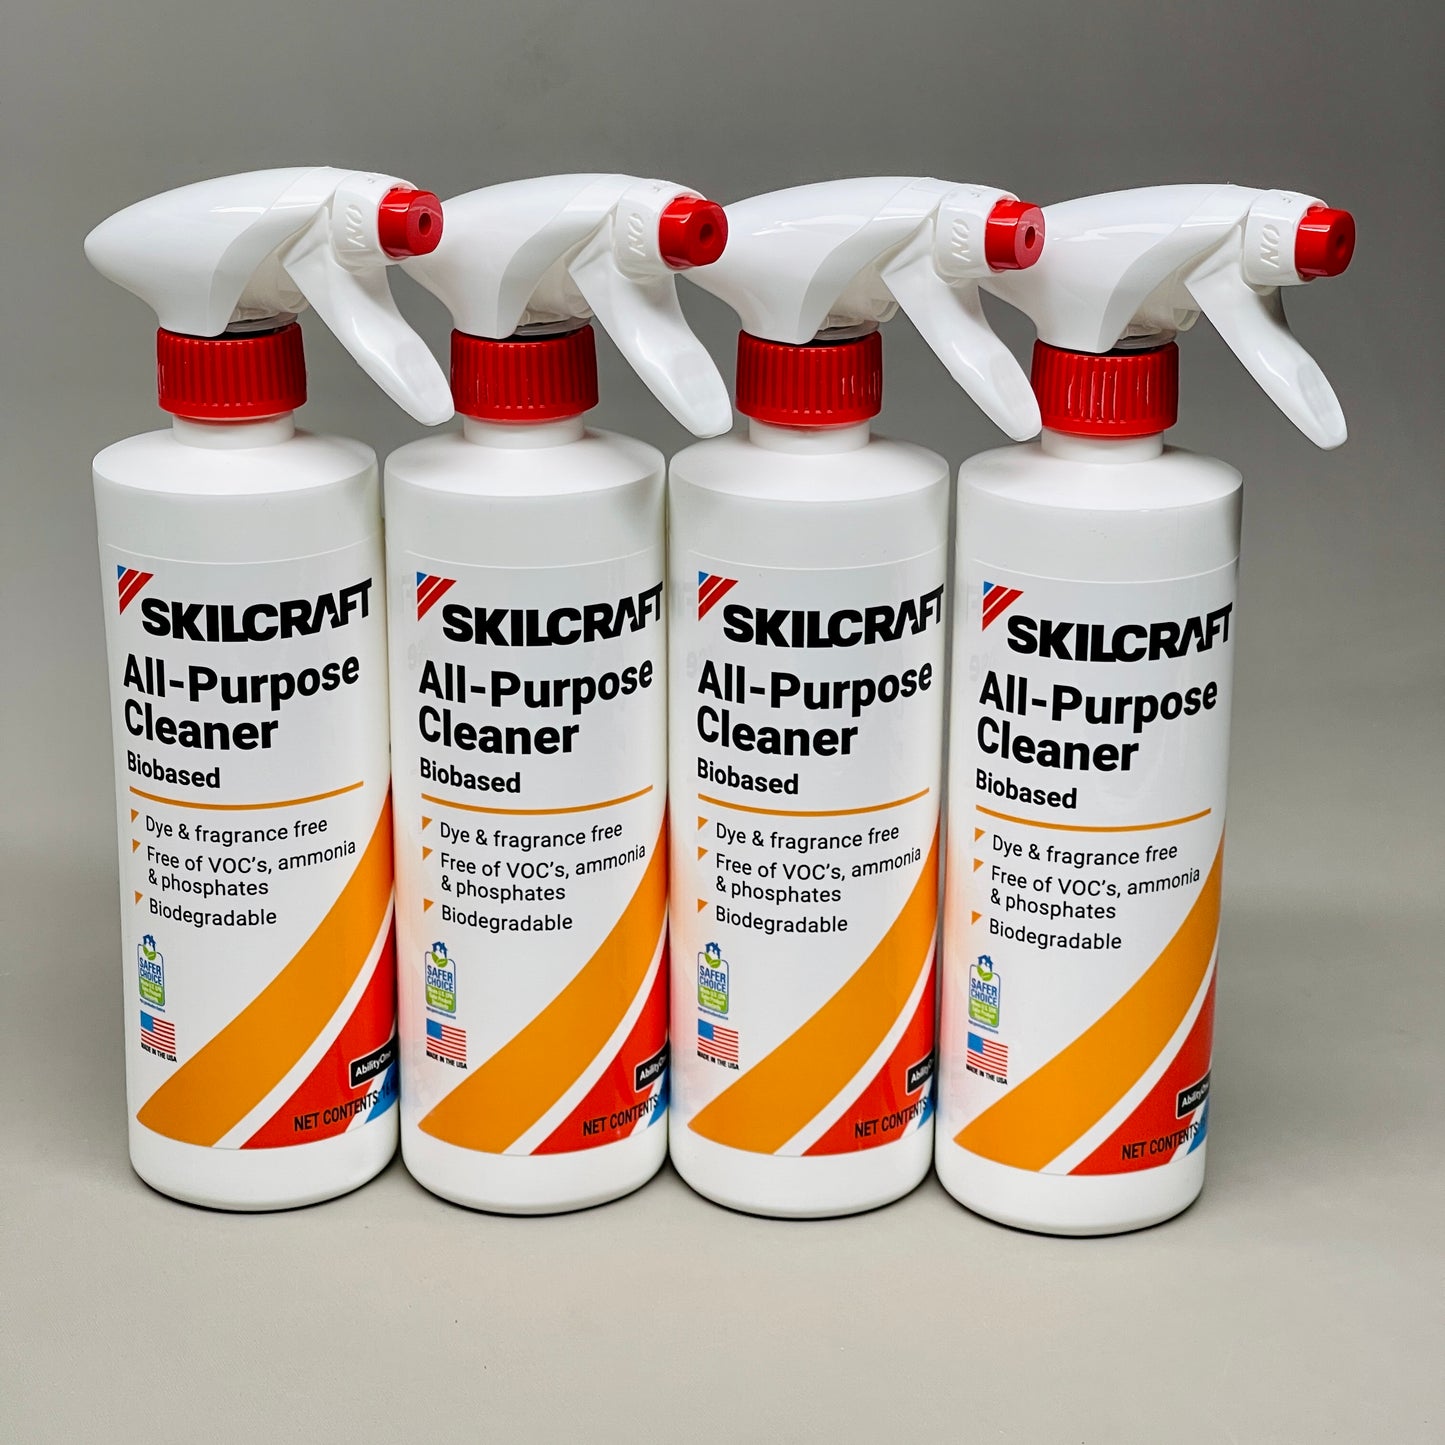 SKILCRAFT All Purpose Cleaner Biobased 4-PACK 16 oz Spray Bottle 9265280 (New)